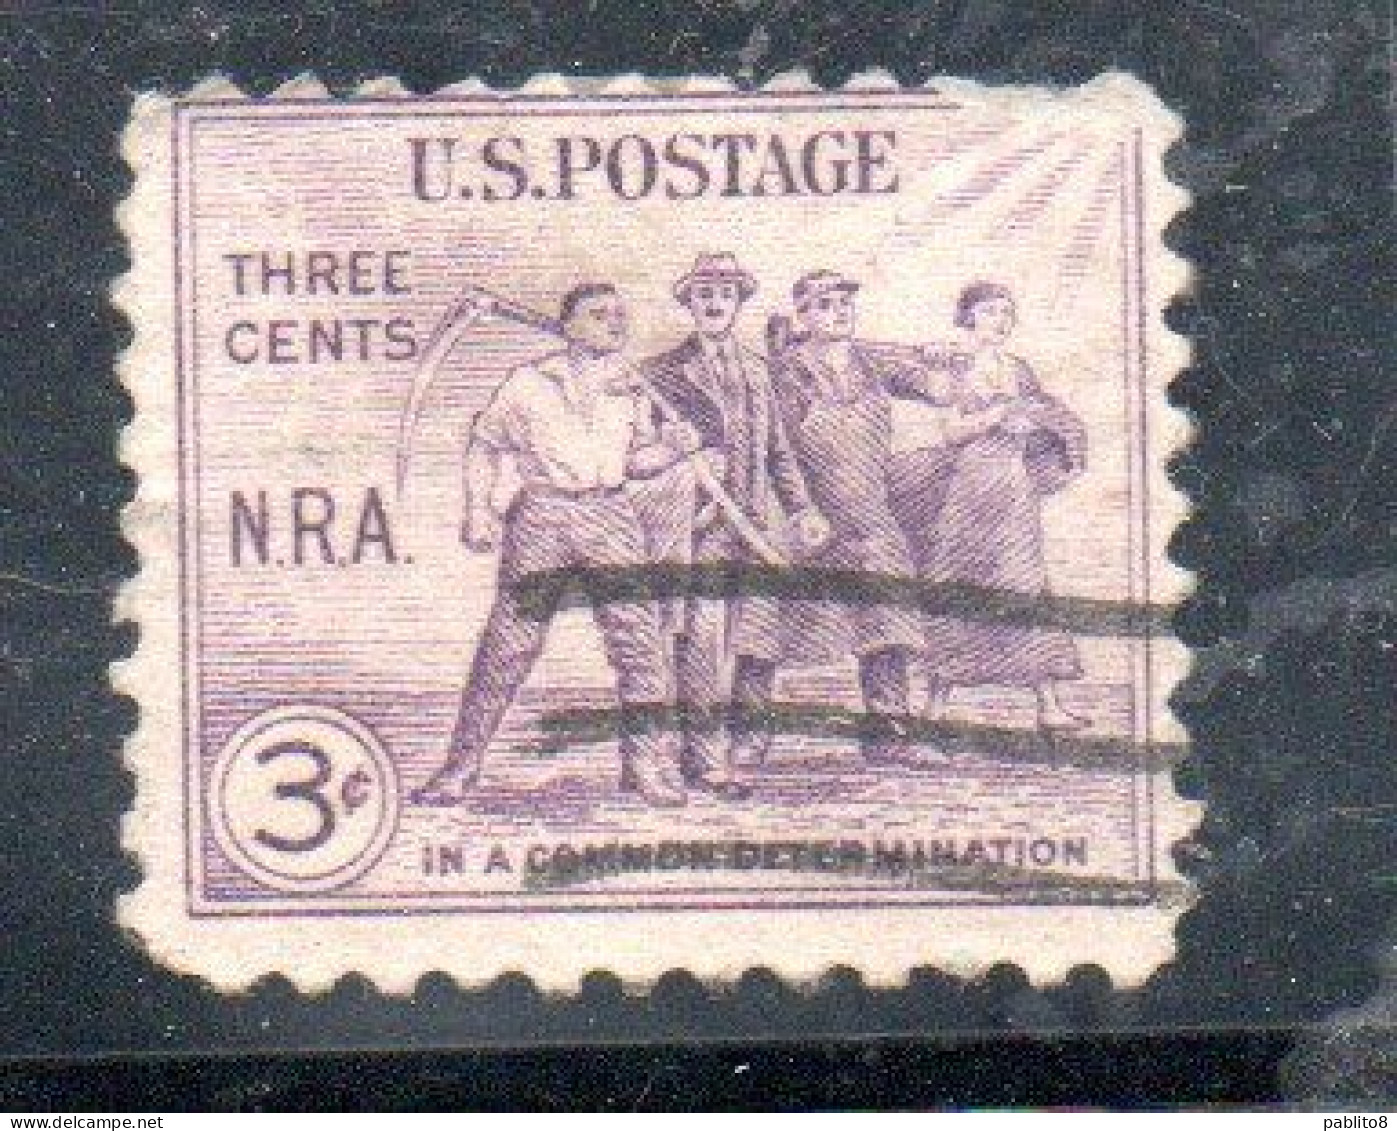 USA STATI UNITI 1933 NATIONAL RECOVERY ACT ISSUE NRA GROUP OF WORKERS CENT 3c STRIP USED USATO OBLITERE' - Oblitérés